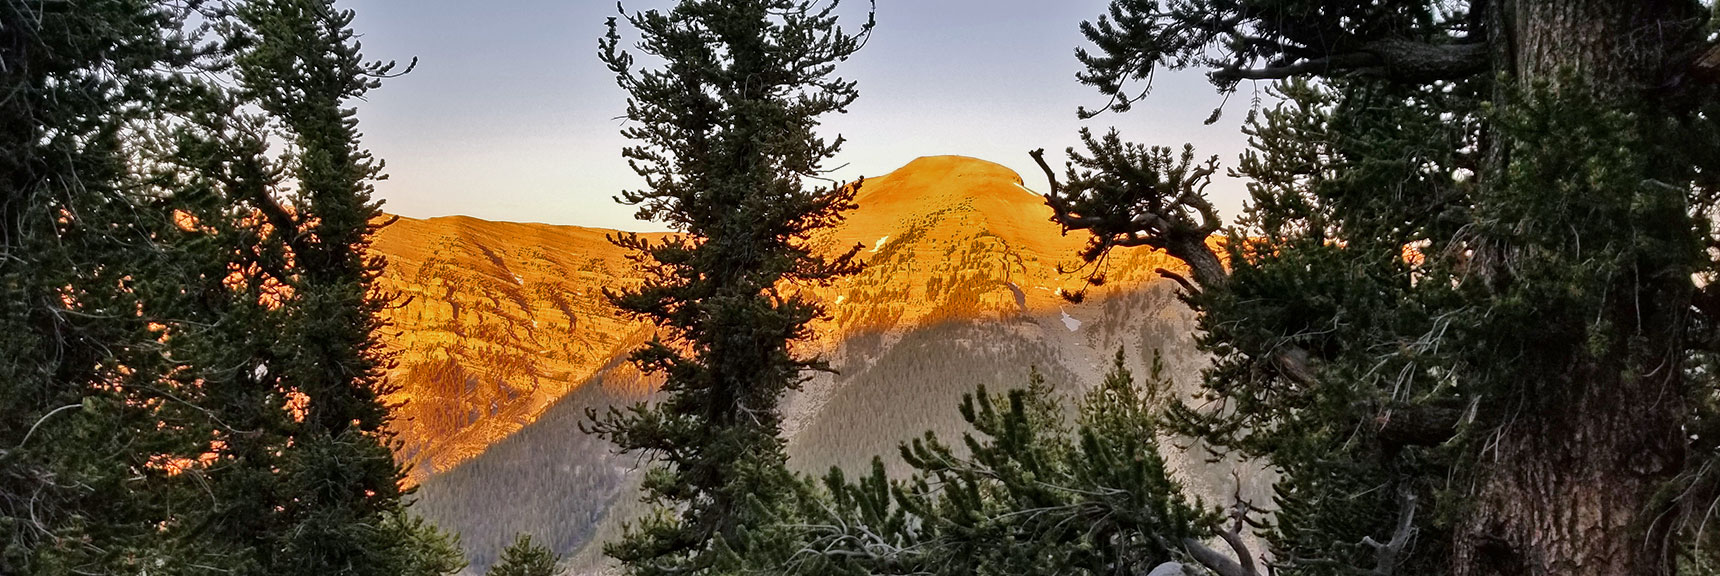 Sunrise View of Charleston Peak from the North Loop Trail | Six Peak Circuit Adventure in the Spring Mountains, Nevada